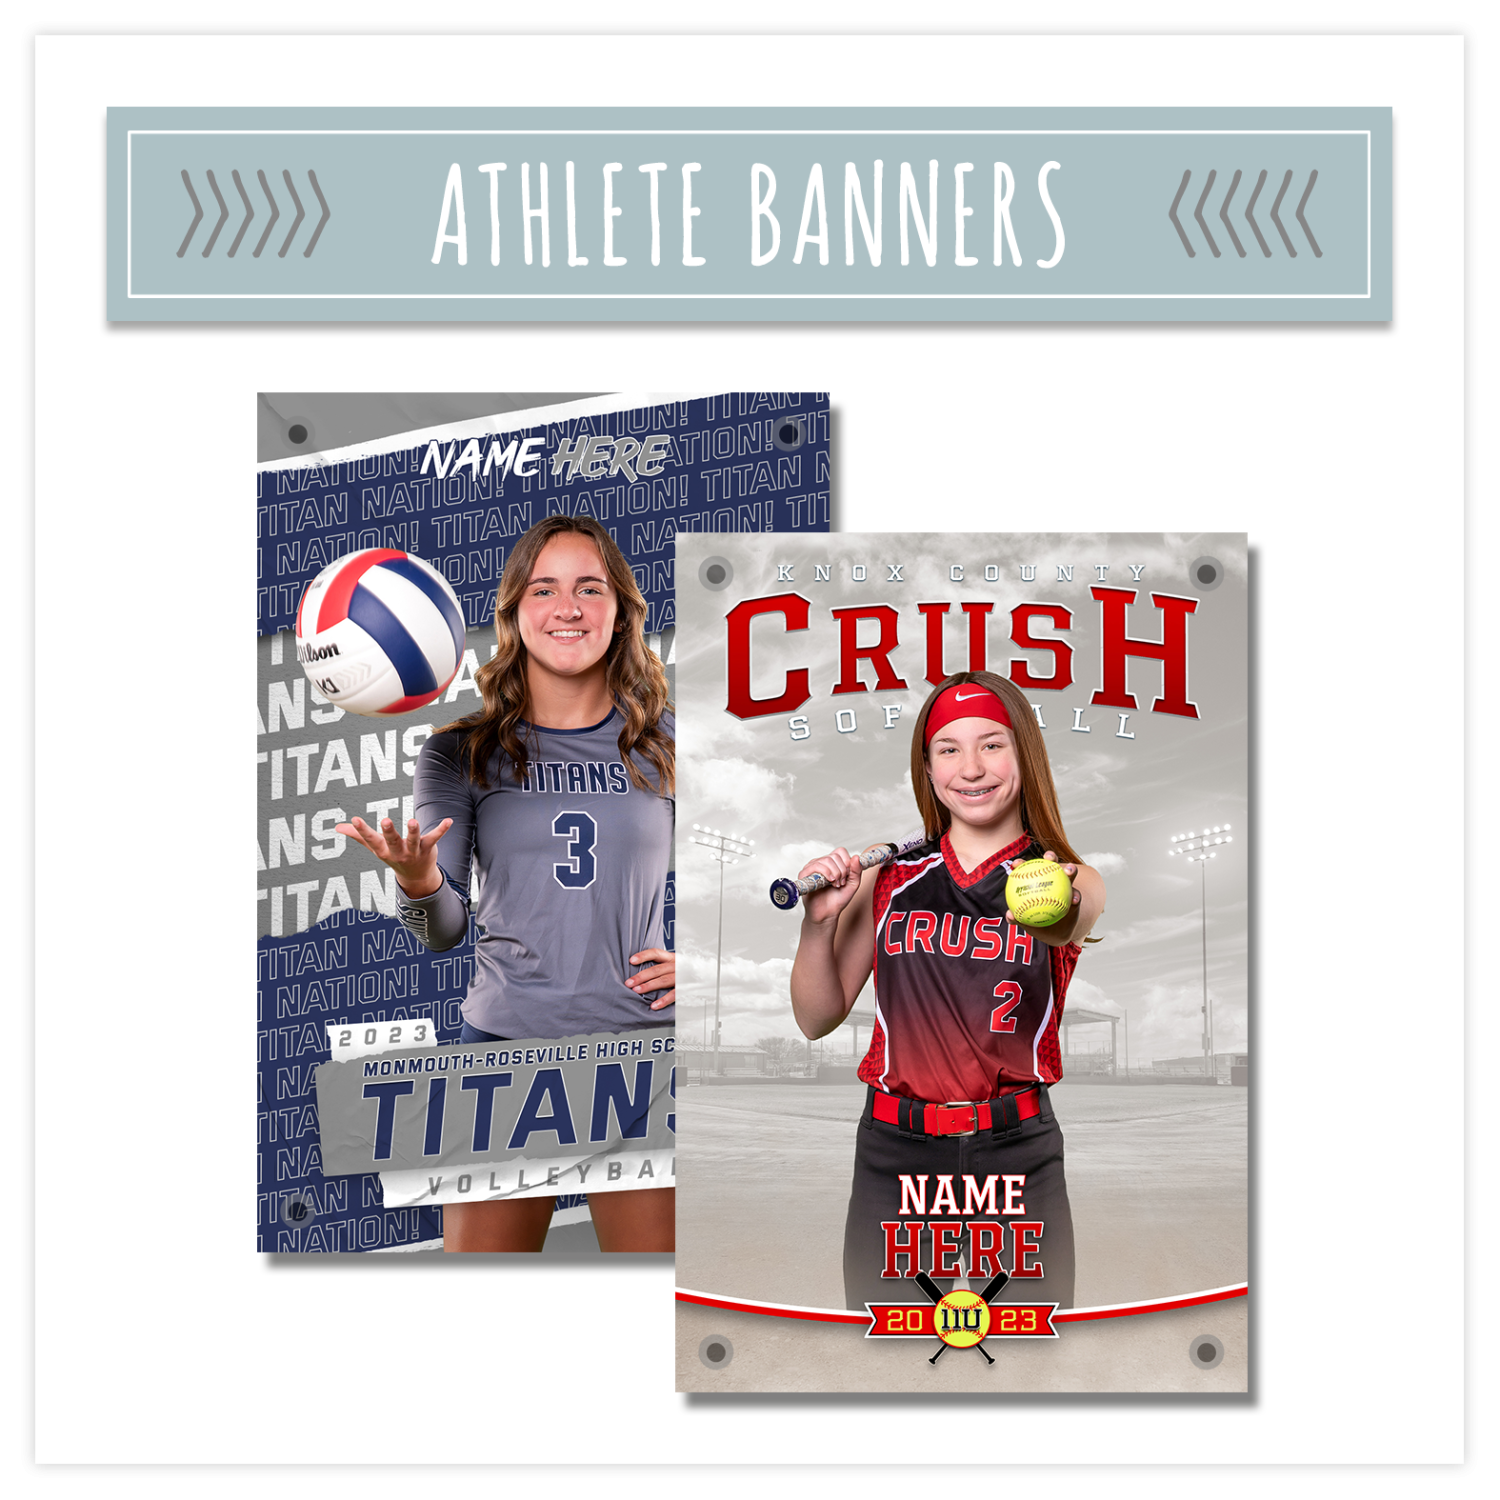 ATHLETE BANNERS